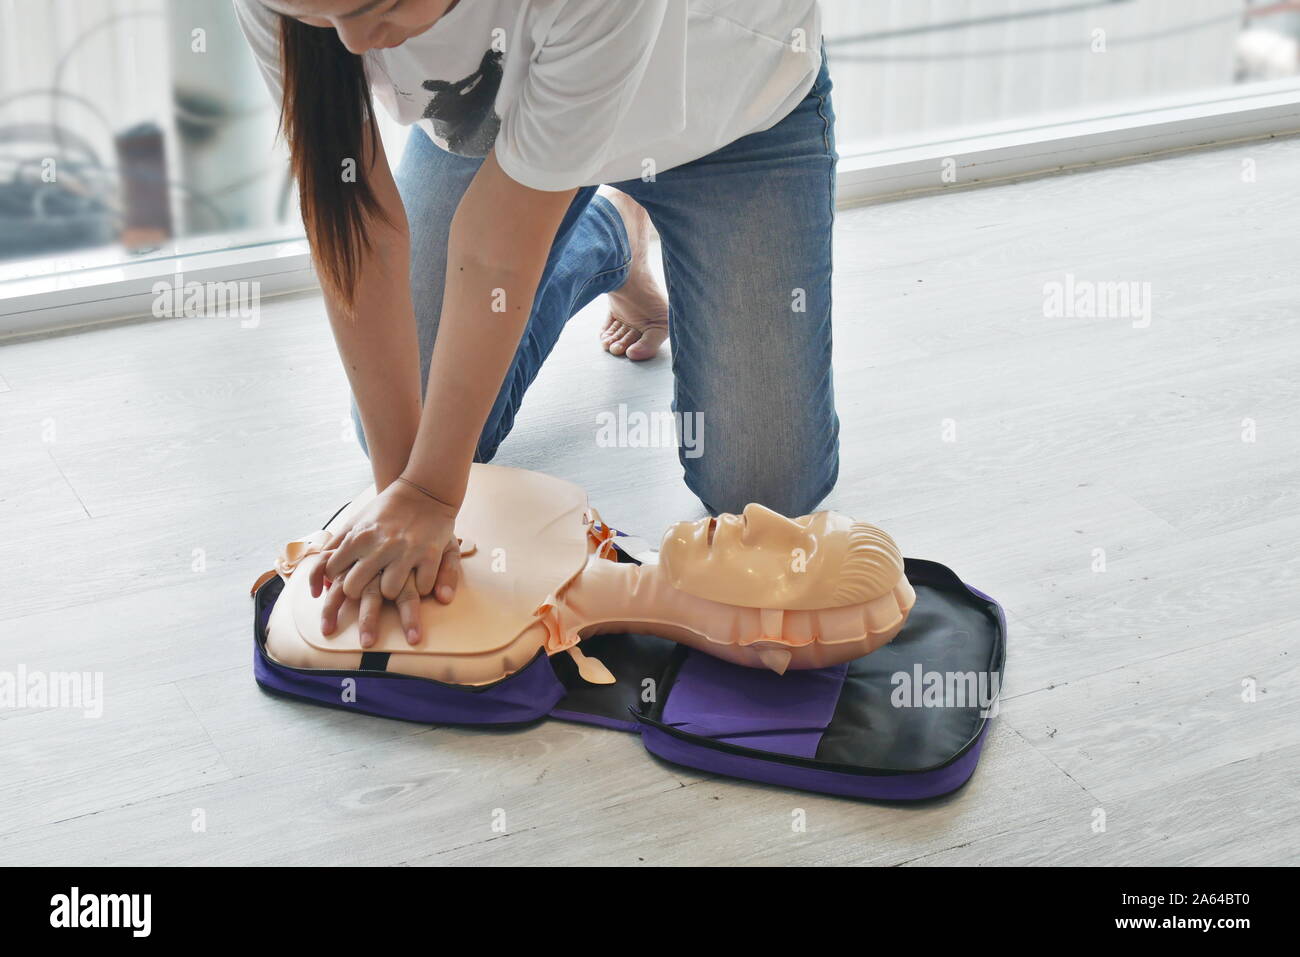 cpr training. close-up of trainee's hand pump on chest of dummy on CPR First Aid Training course for primary safe life Stock Photo